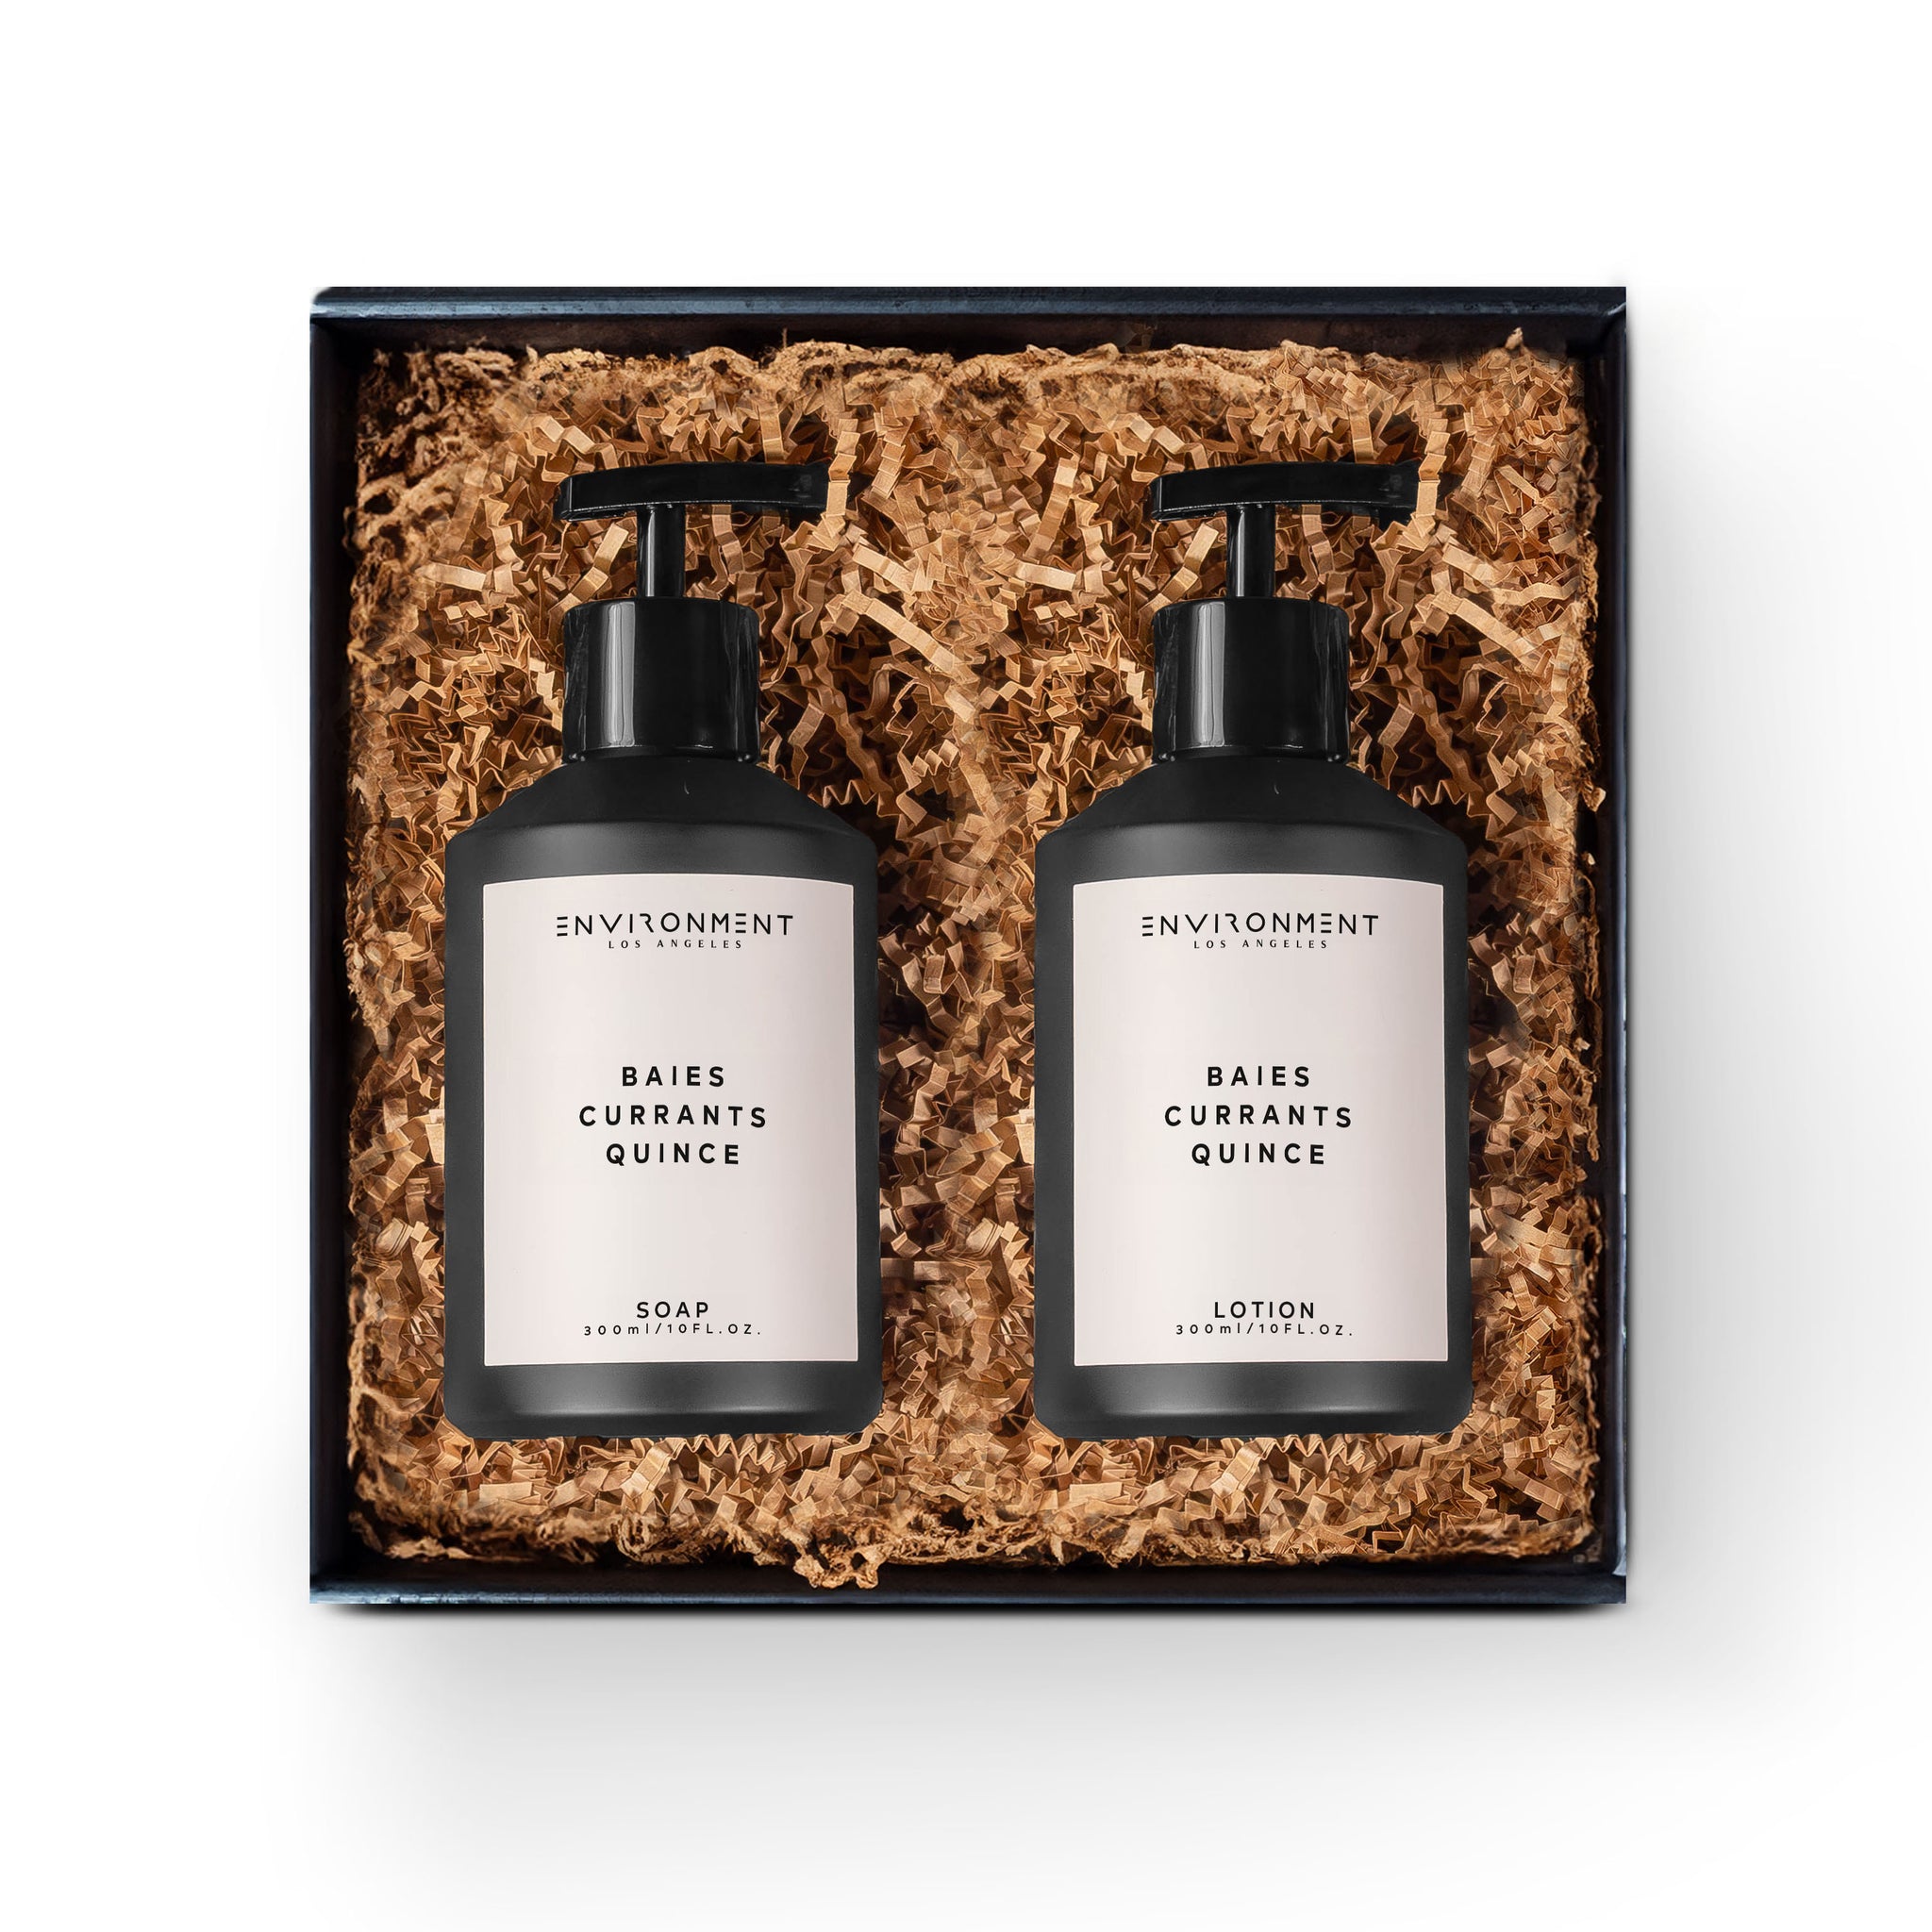 Baies | Currants | Quince 300ml Hand Soap and 300ml Lotion Gift Pack (Inspired by Diptyque Baies®)